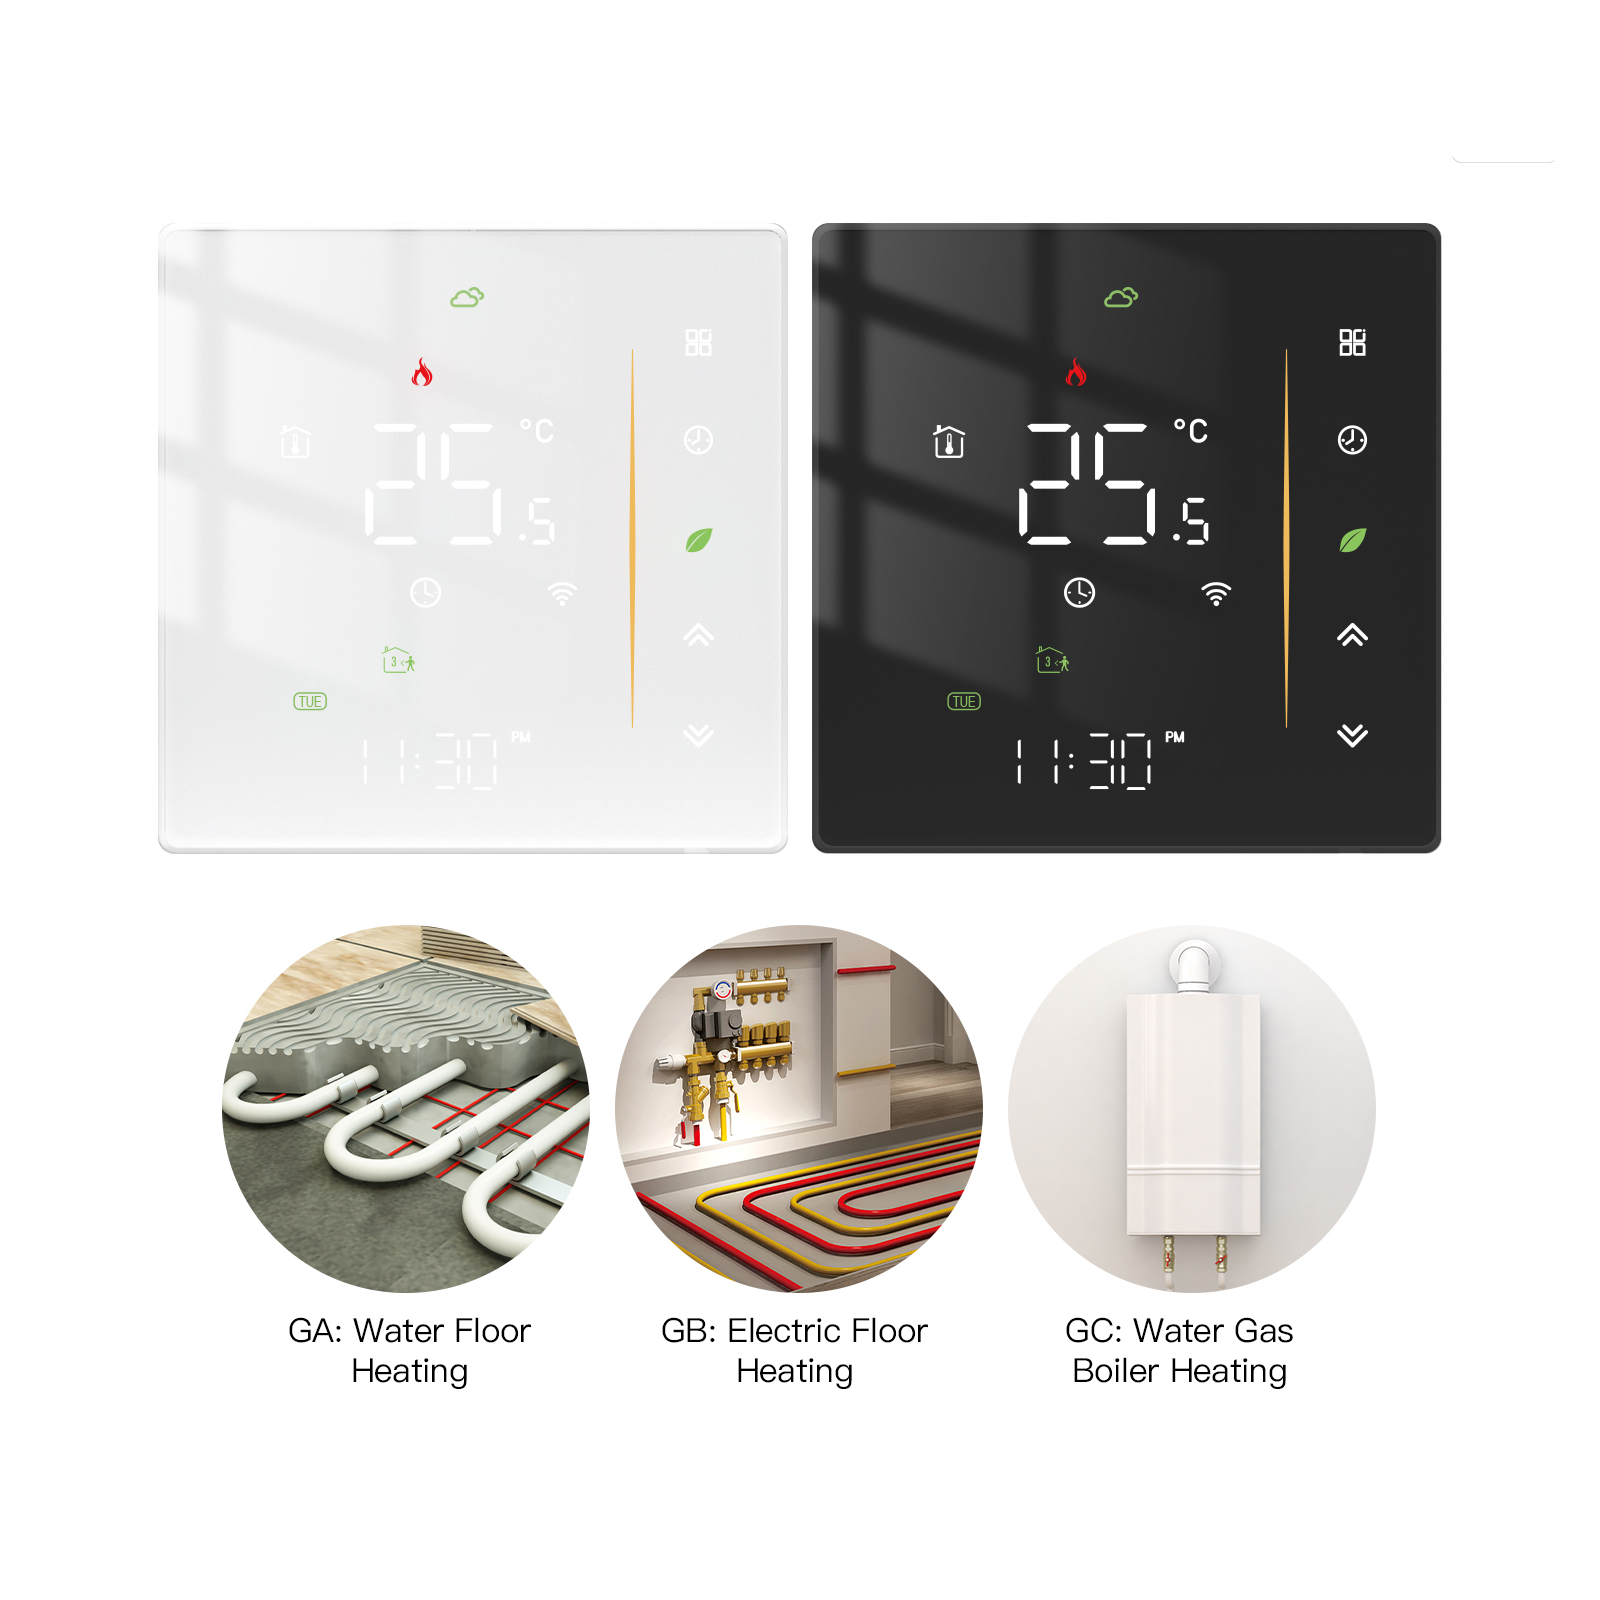 World first Zigbee-certified smart home thermostat for direct